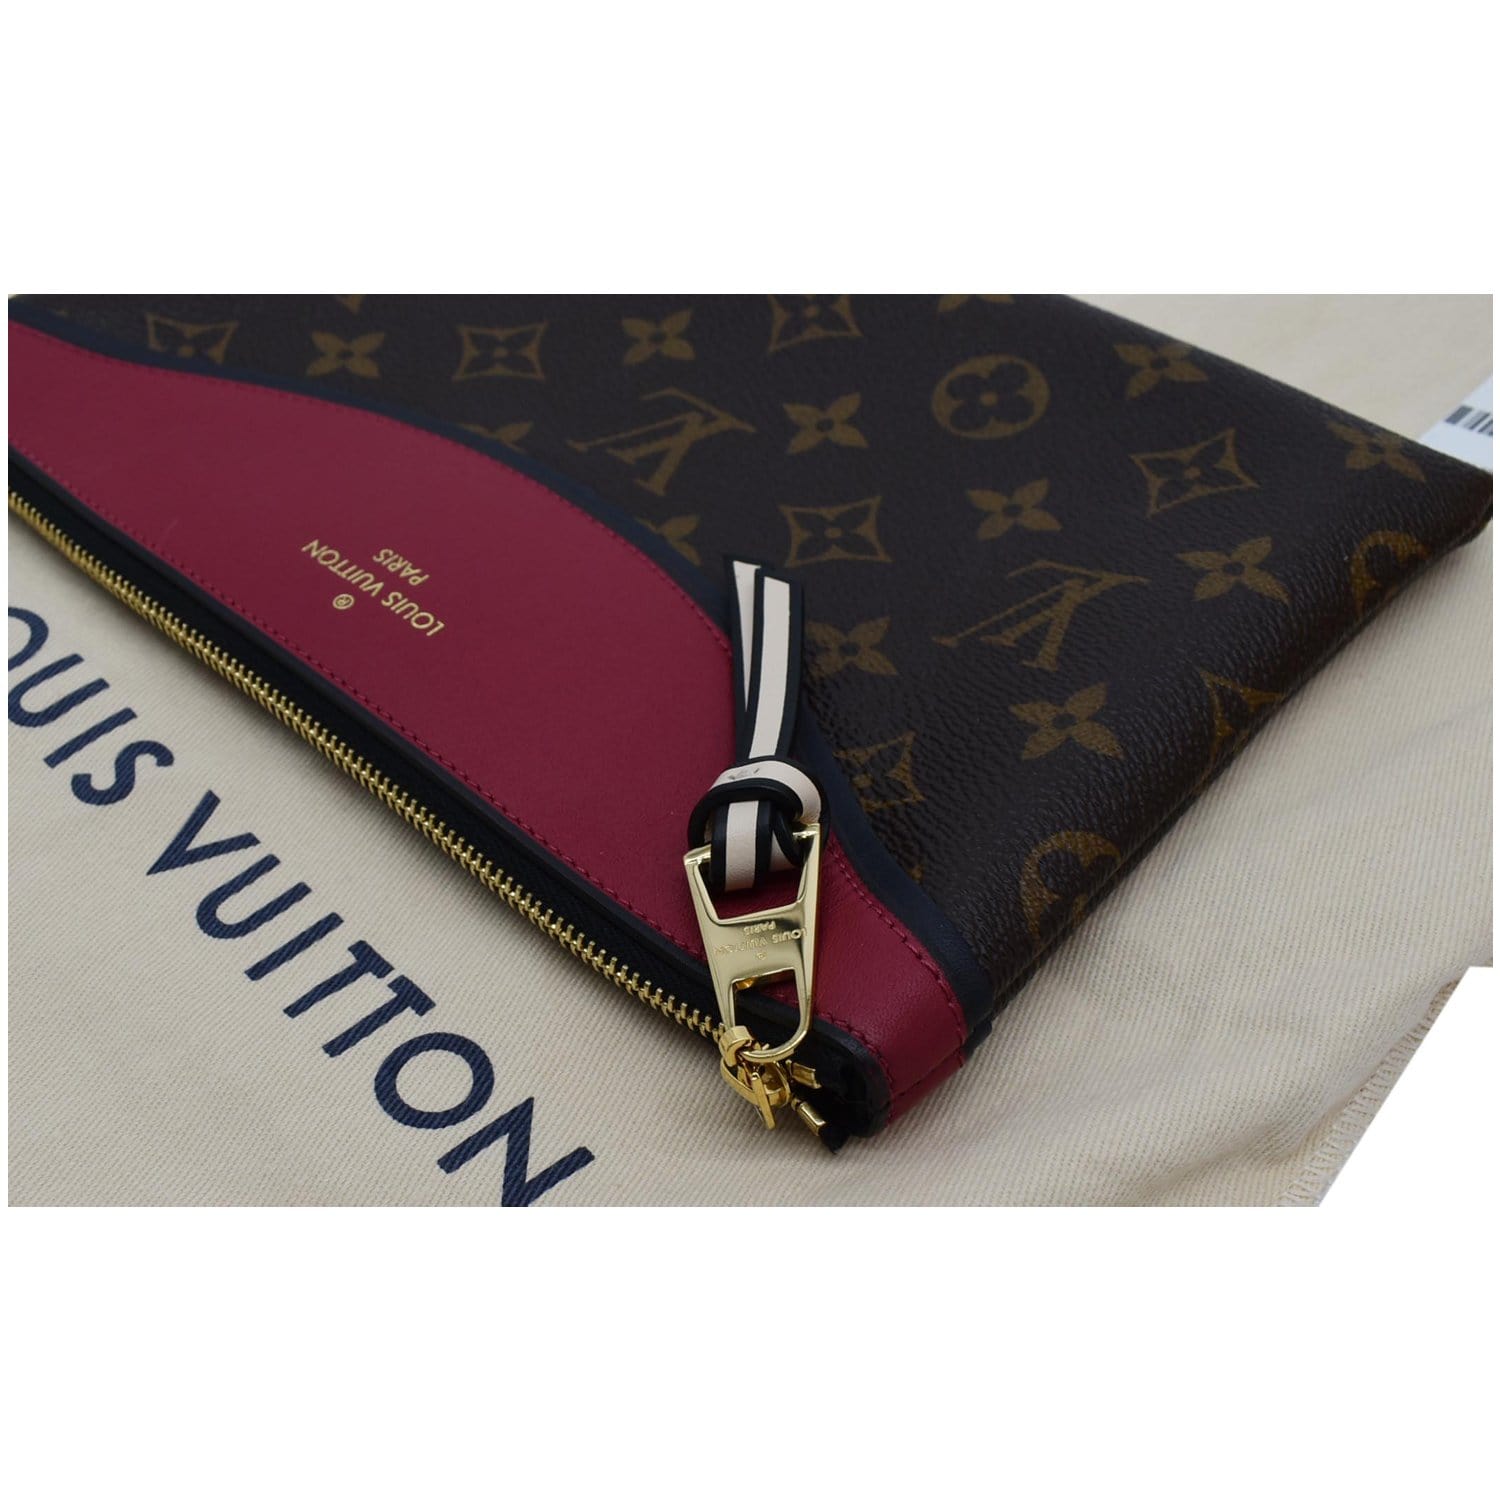 Louis Vuitton Pochette Cle Monogram Red in Taurillon Leather with